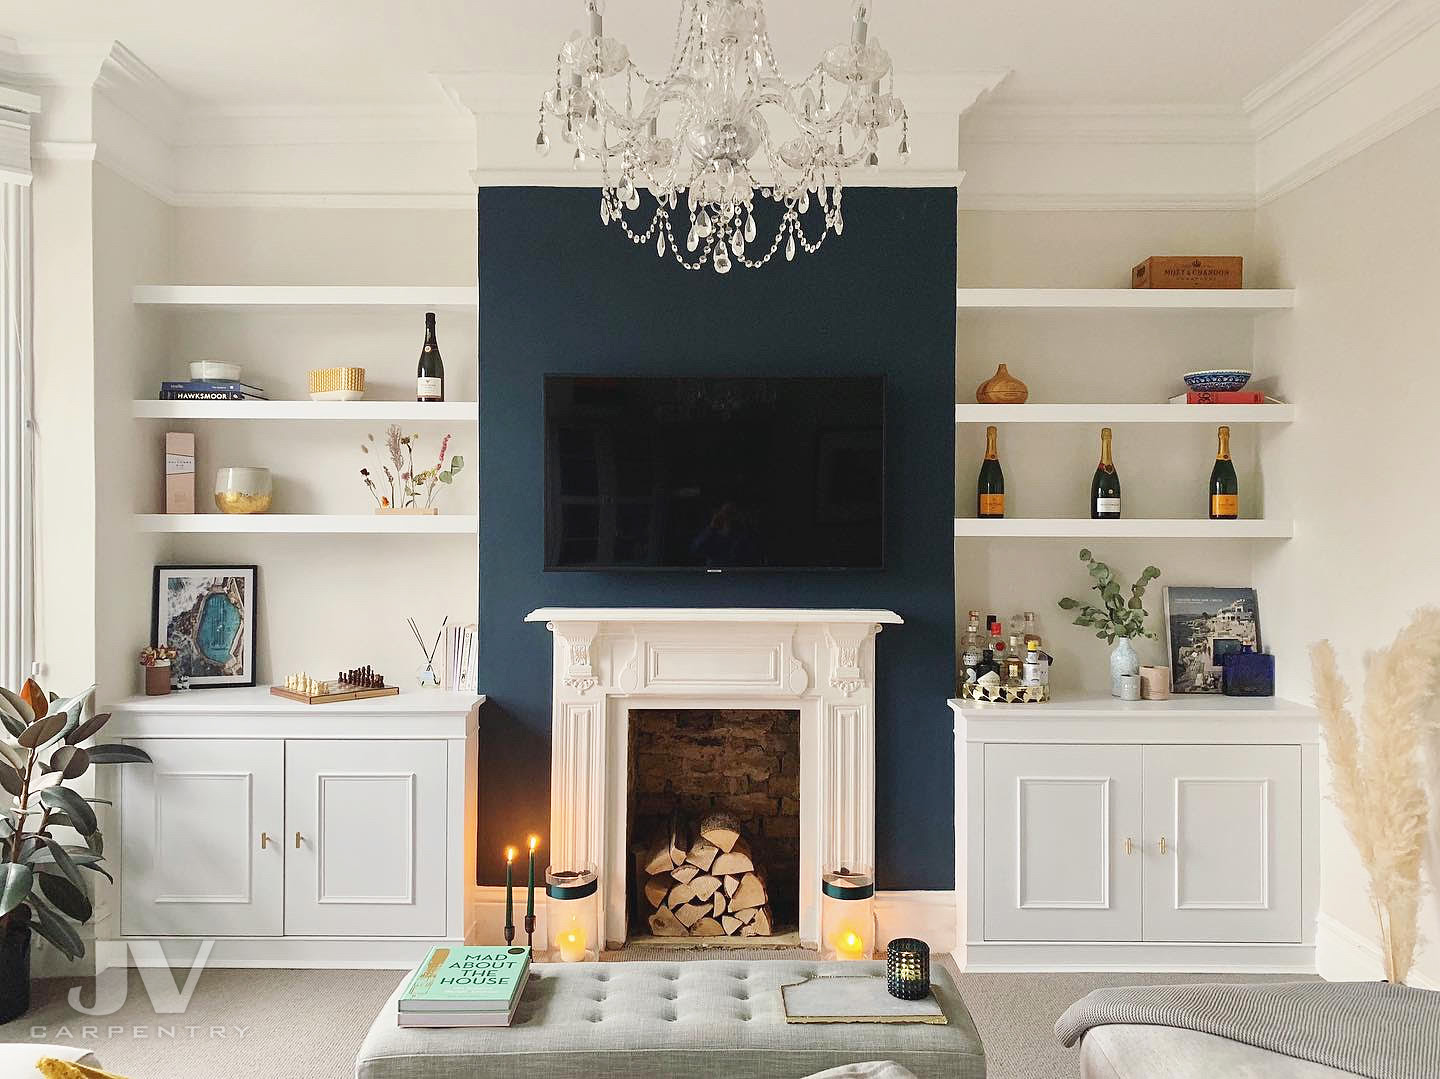 23 Alcove Shelving Ideas For Your, Bookcases Either Side Of Fireplace